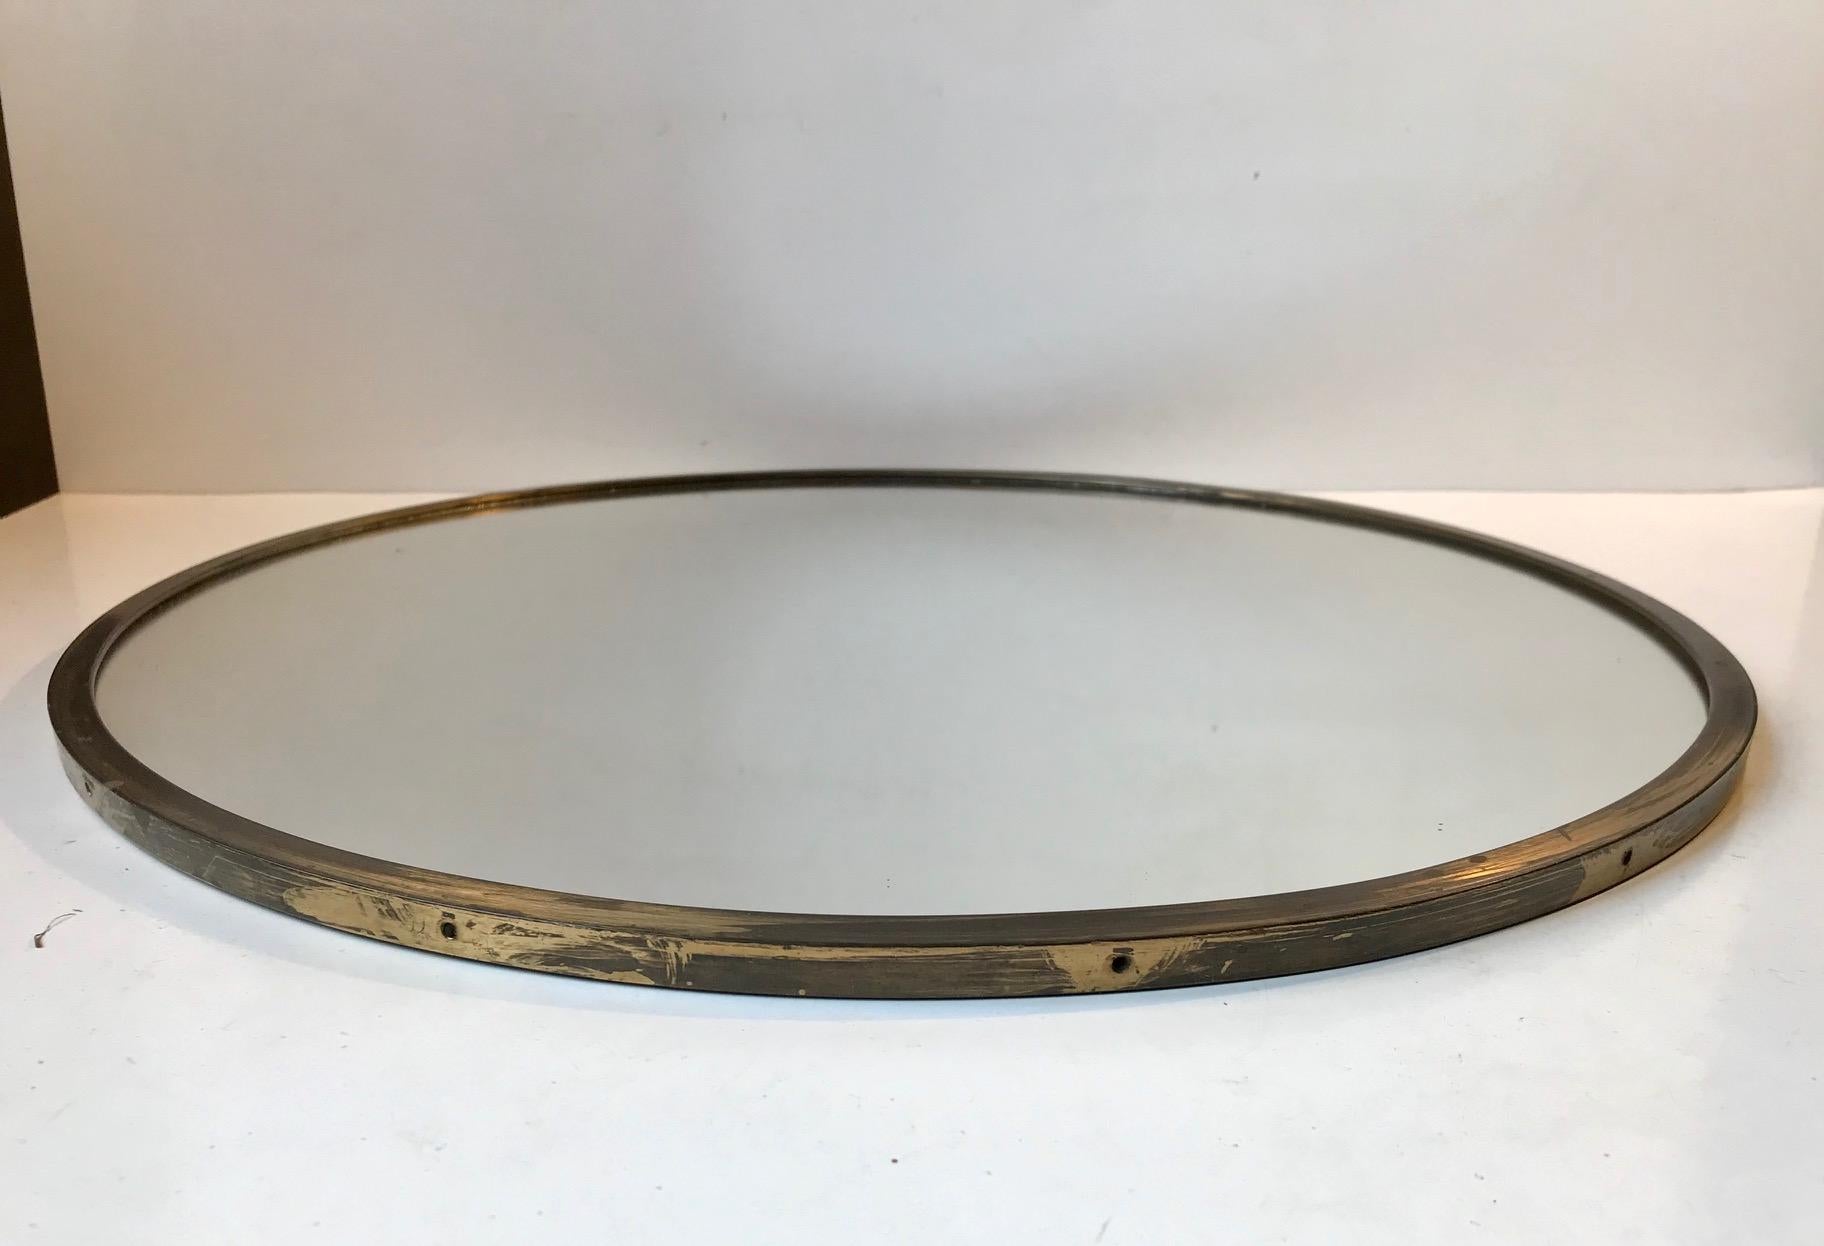 A round wall mirror in a patinated solid brass frame. Stylistically very funktionalist, simple and plain. Its just a mirror and it was made in Italy during the 1950s or perhaps a bit earlier. Measurements: D: 43.5 cm, Dept: 1 cm.